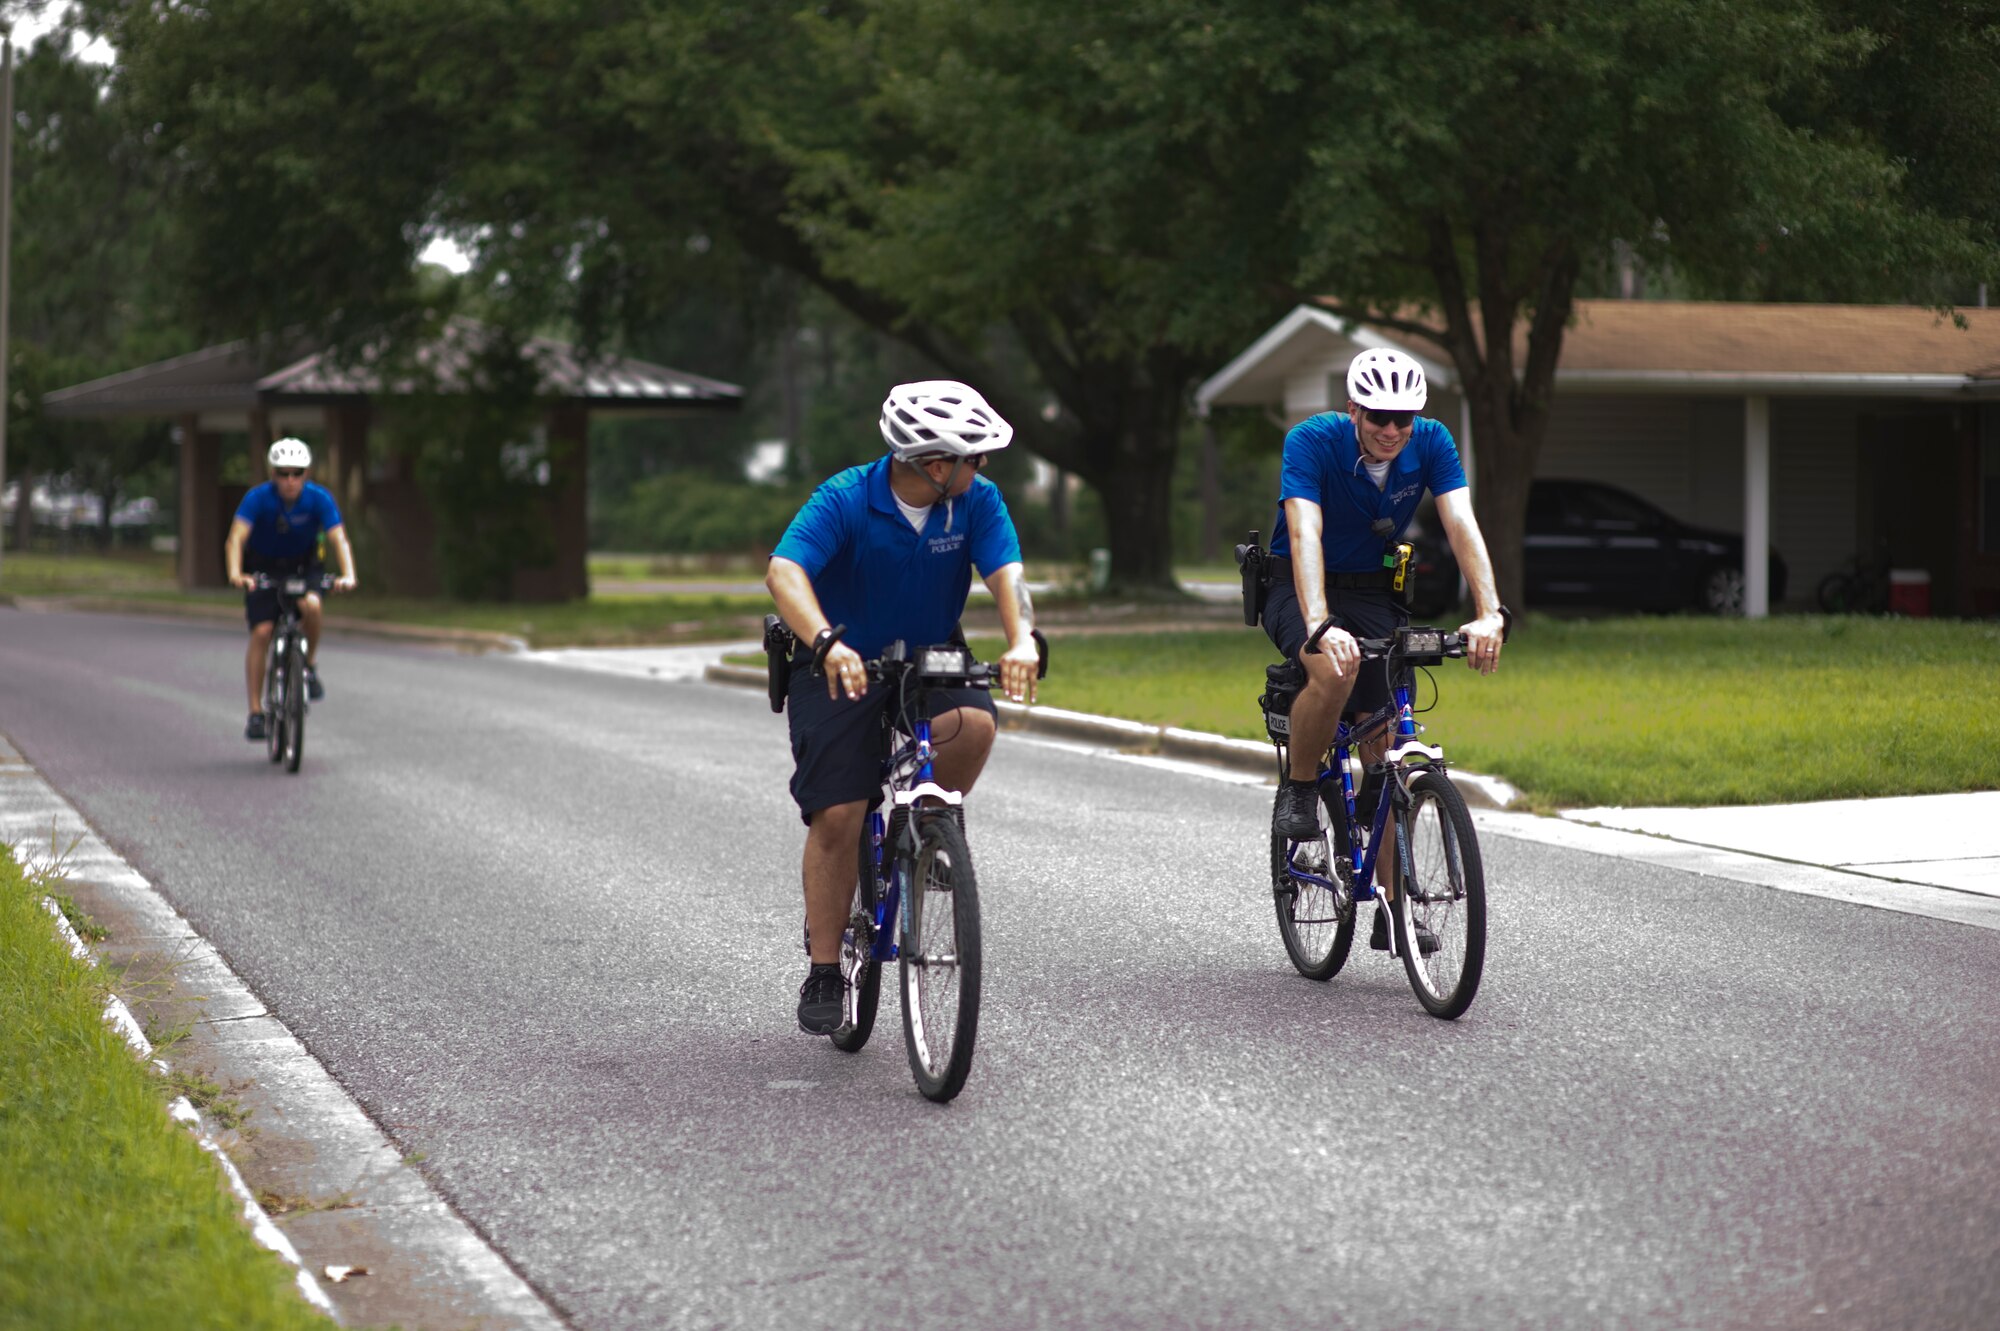 The 1st Special Operations Security Forces Squadron bike patrol ride through base housing July 24, 2013. The 1st SOSFS use the bike patrol as a way to increase their presence in the housing areas on base.
(U.S. Air Force Photo/ Staff Sgt. John Bainter)
